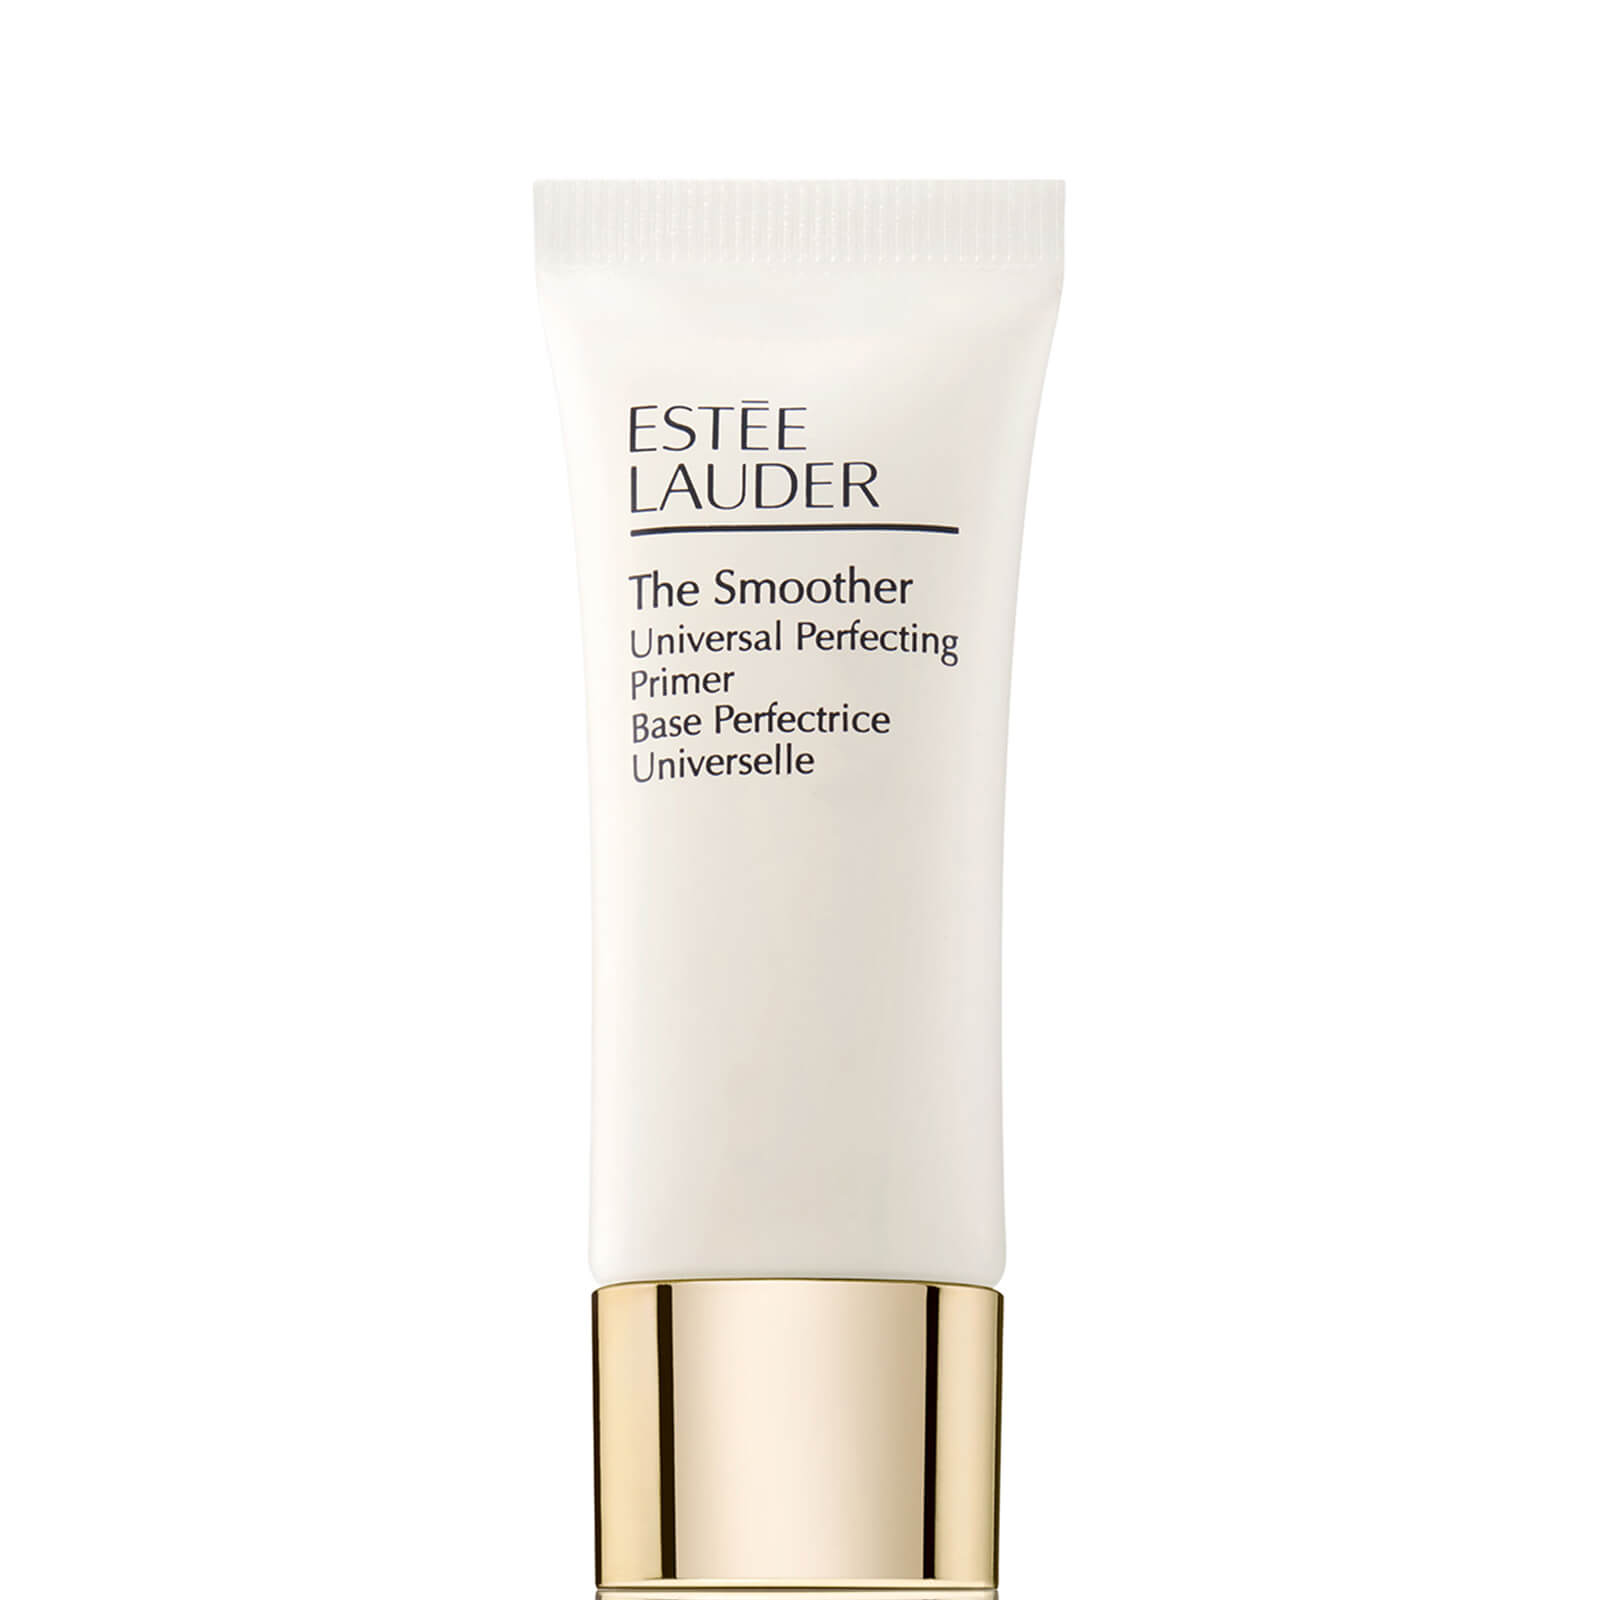 Estée Lauder The Smoother Universal Perfecting primer 15 ml